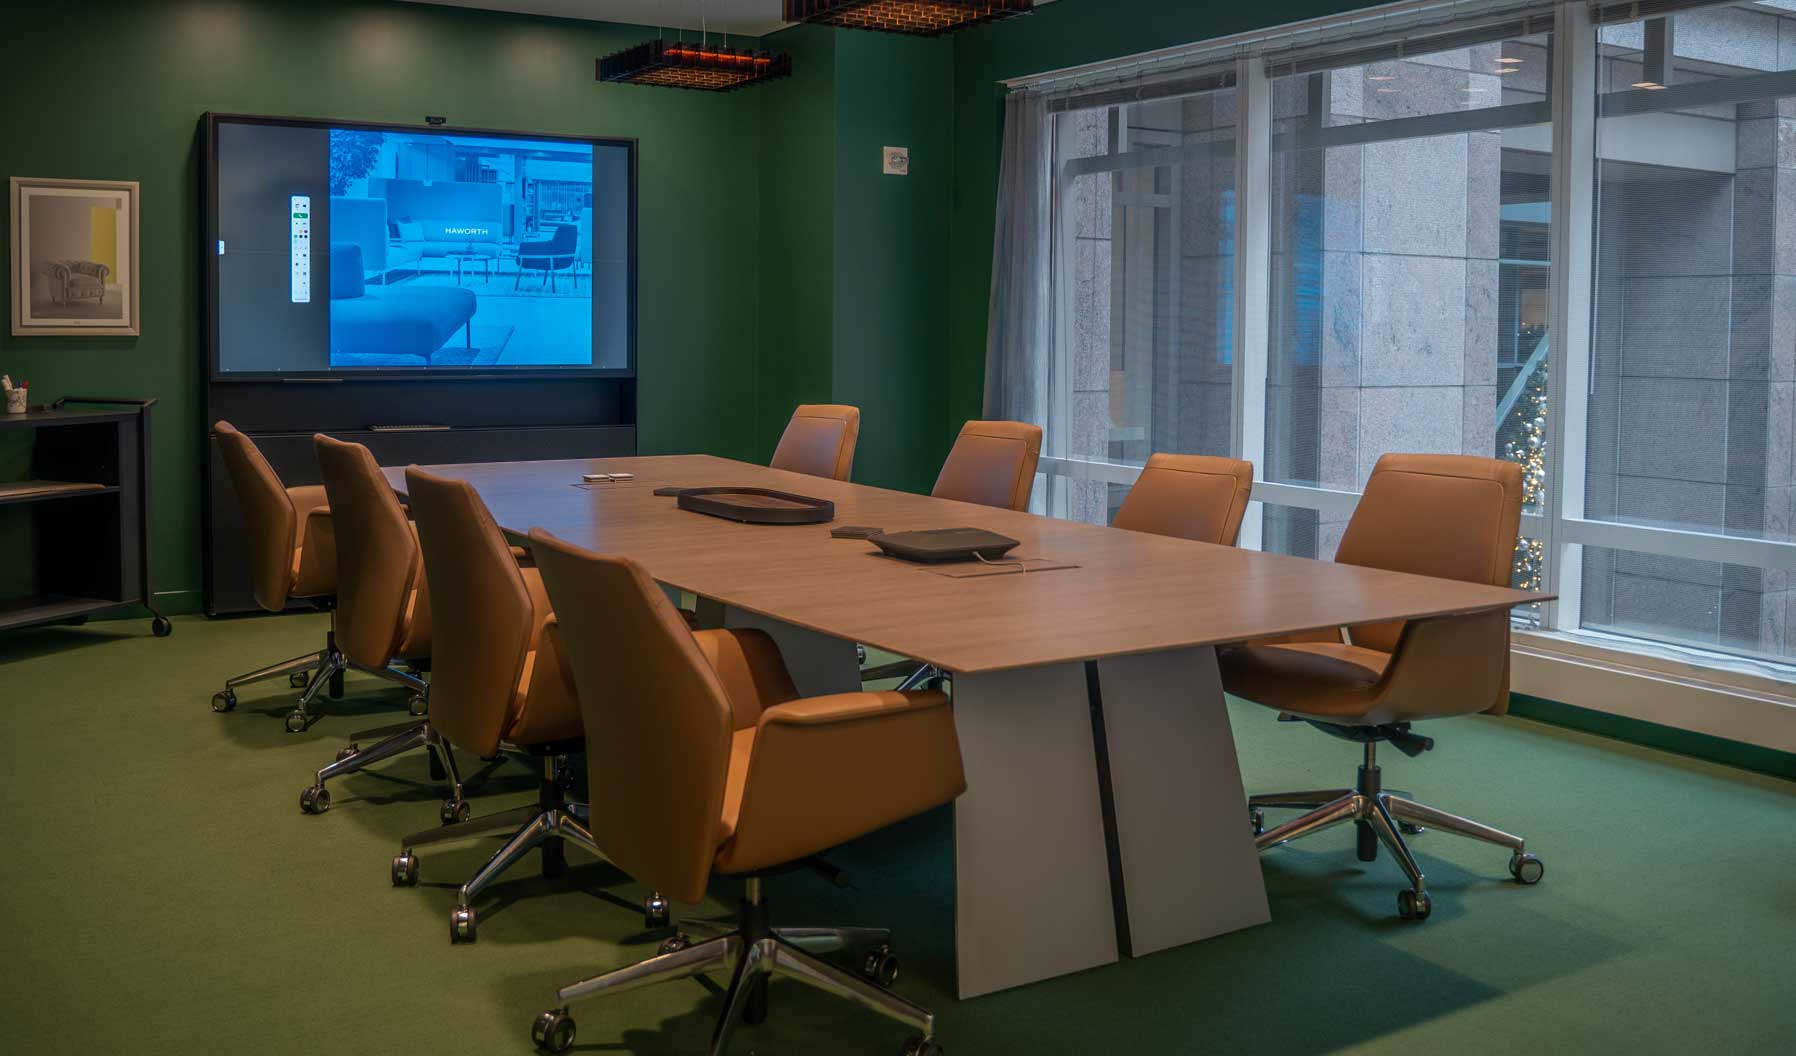 Conference and Meeting space that supports both formal and strategic collaboration activities with a Bluescape screen and whiteboard space to share ideas and large window views to let in natural day light.